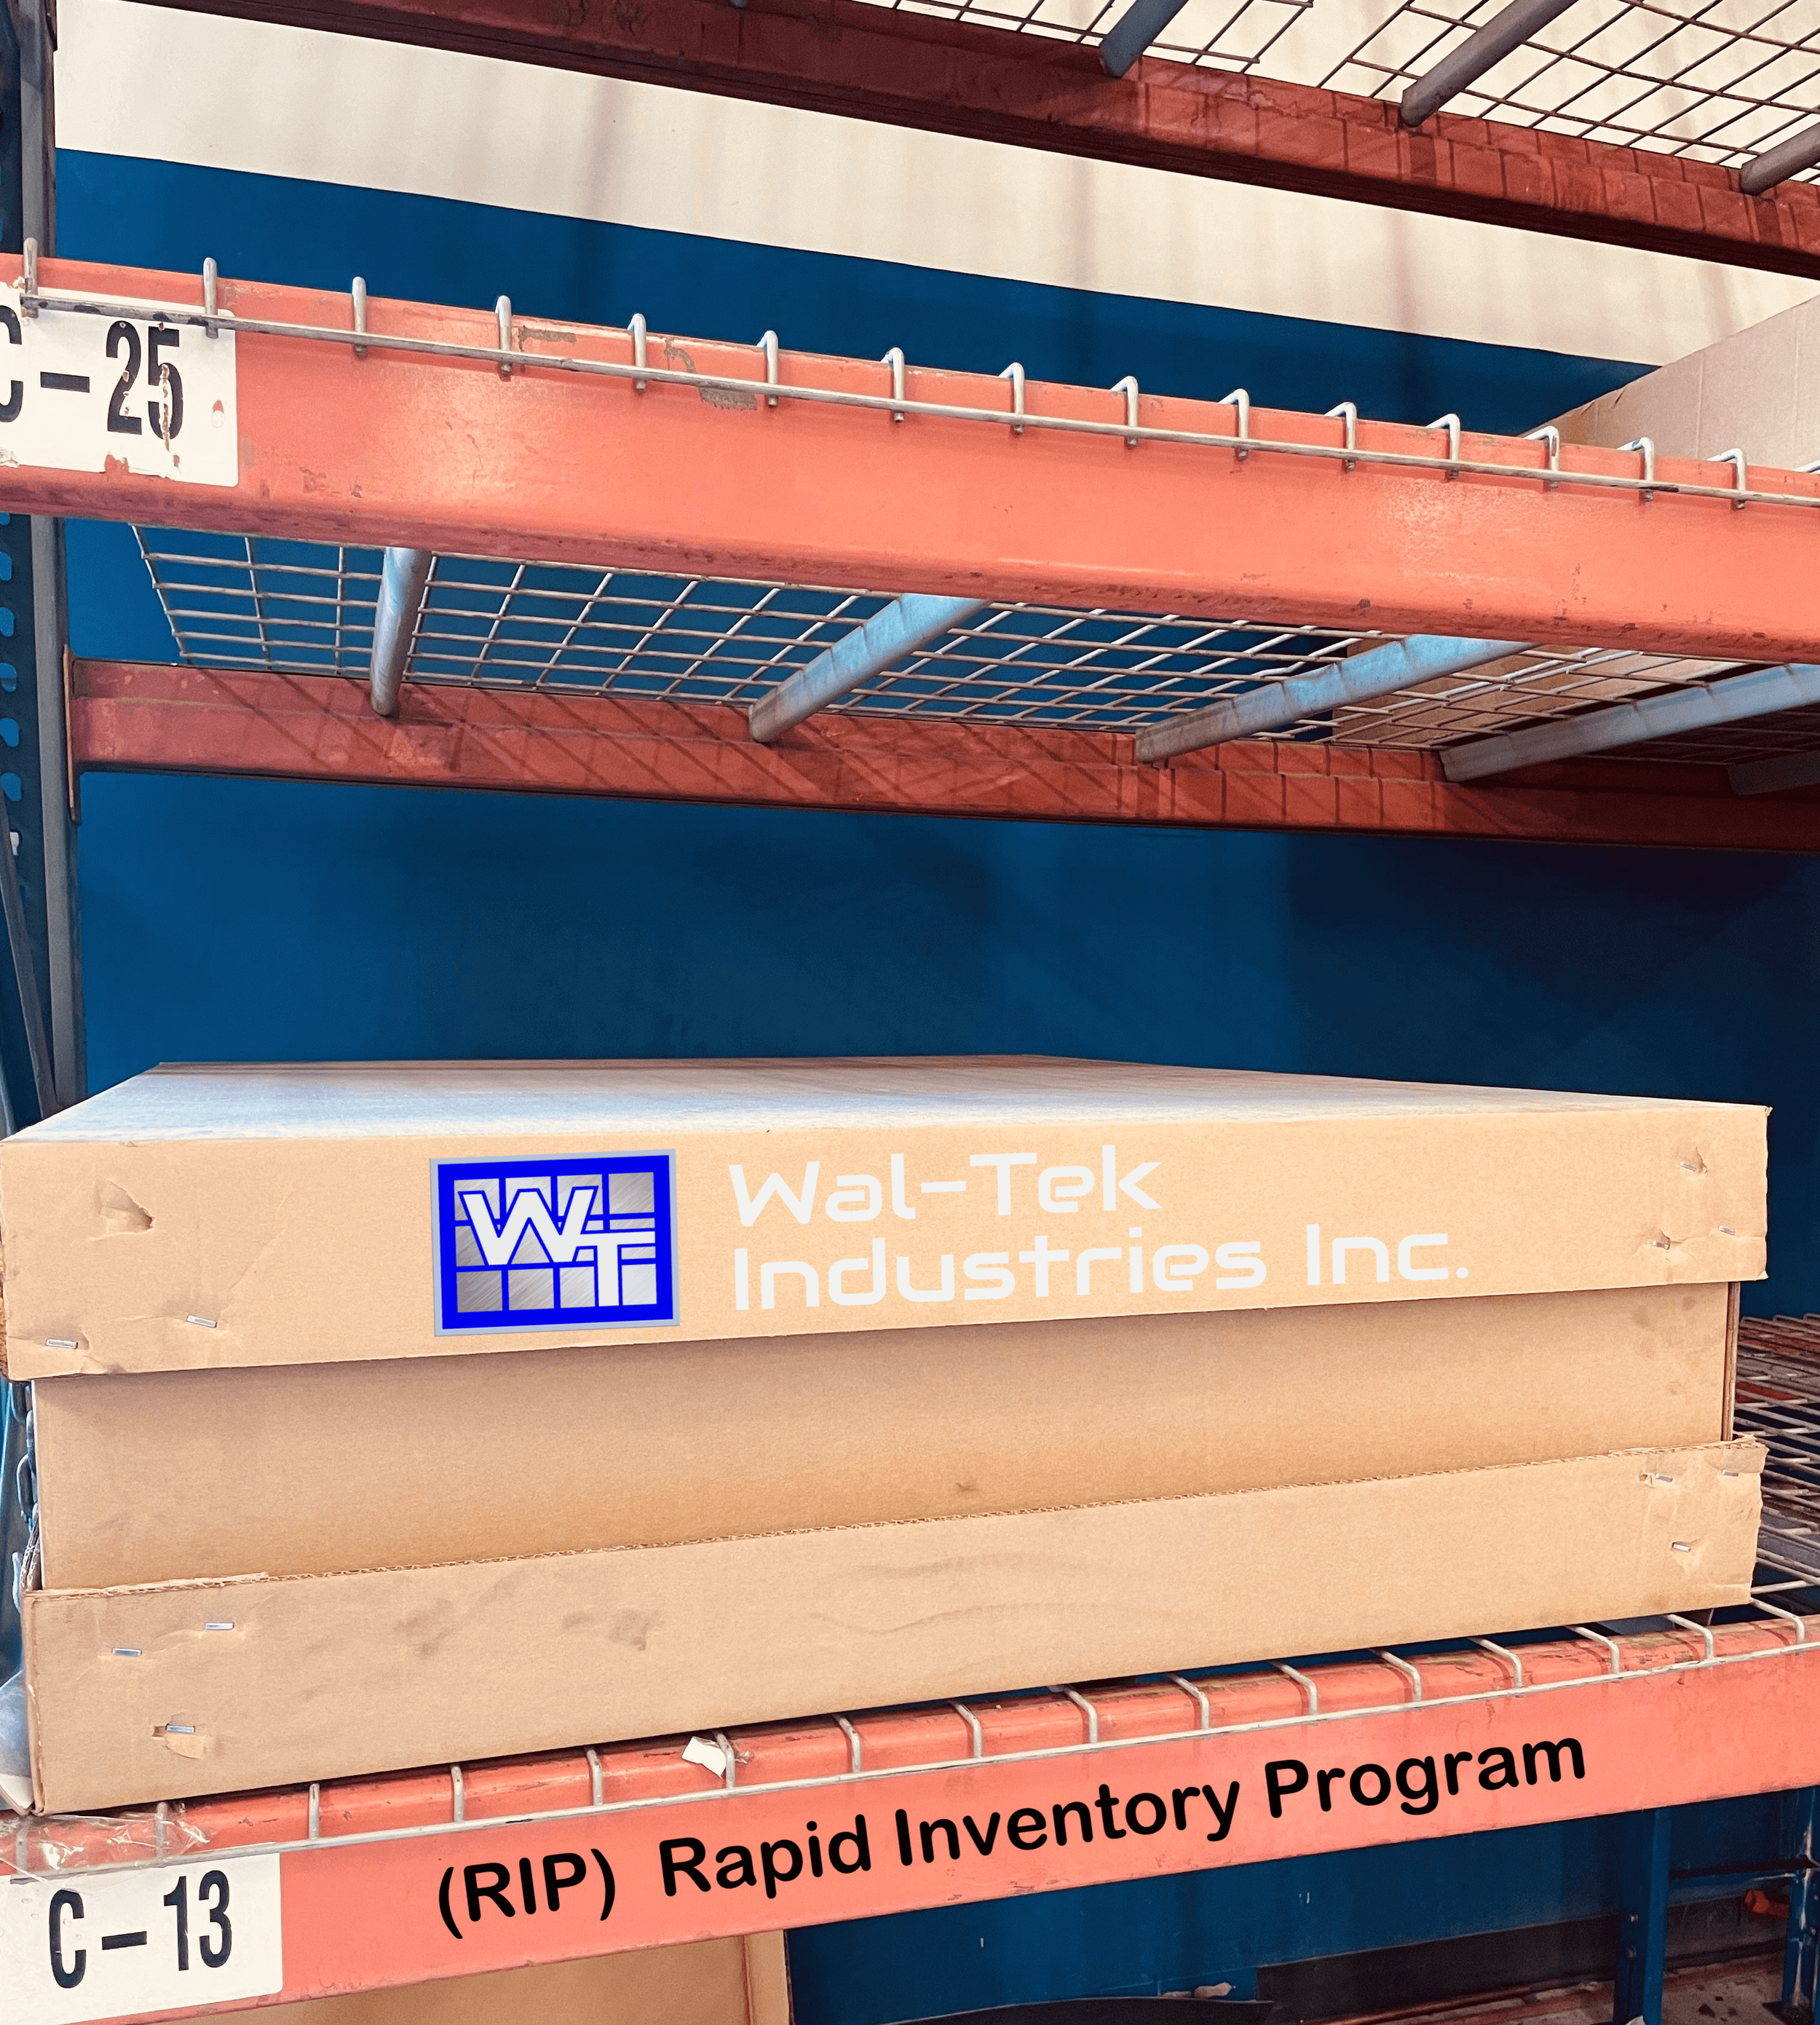 Wal-Tek’s Rapid Inventory Program for Precision Machining and Fabrication